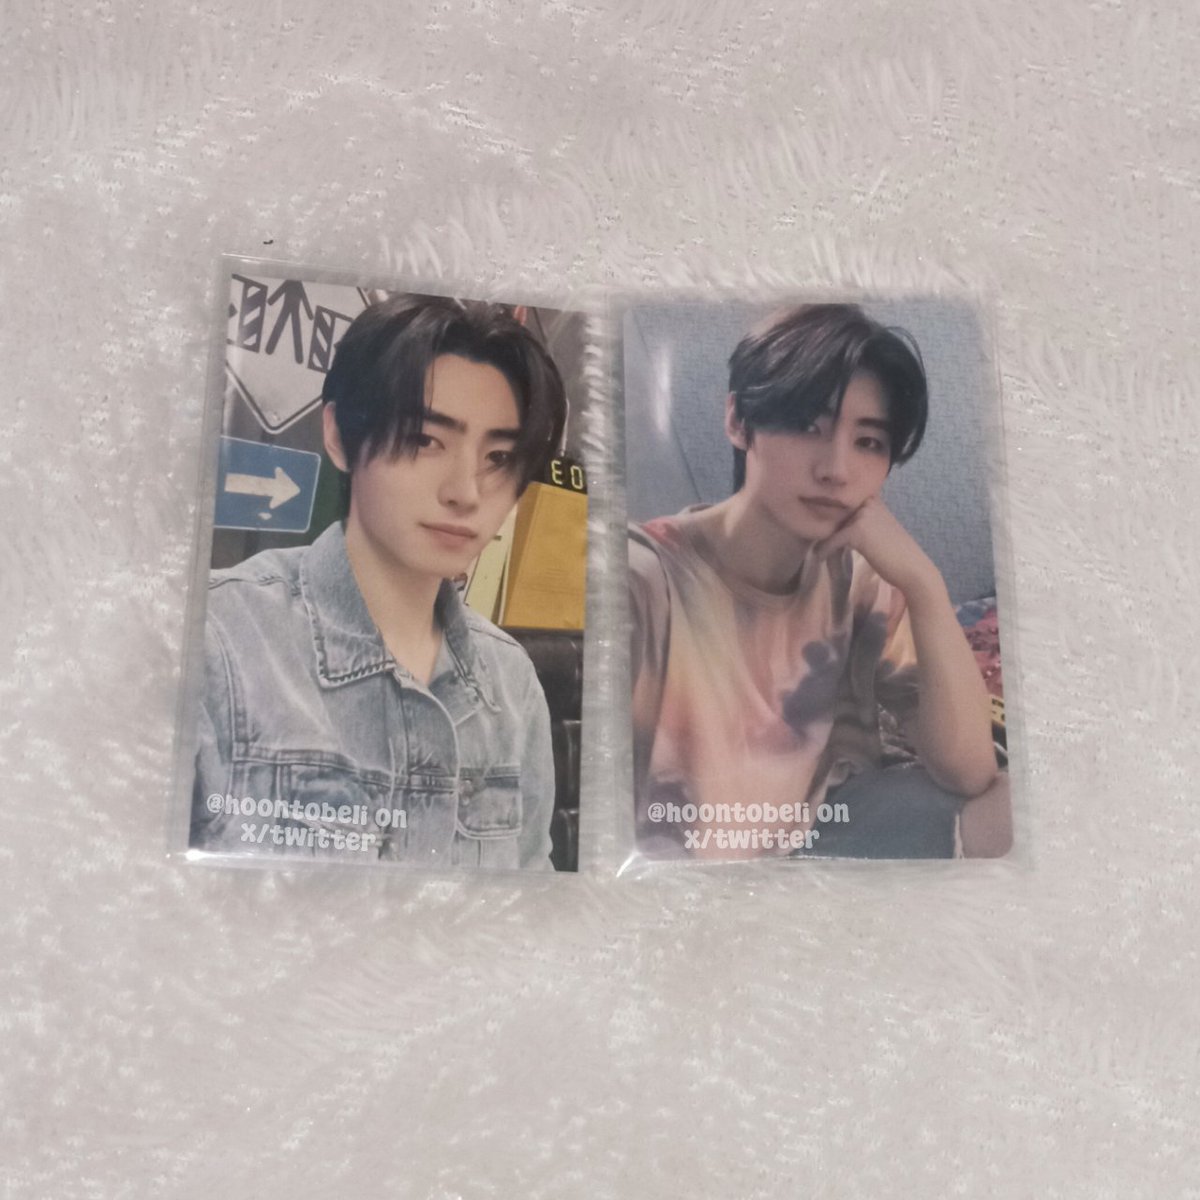 HELP RETWEET/RT❗
wts, want to sell. lfb, looking for buyer 
📍ready ina 
🏡 dom surabaya - jatim
co via shopee ✅
keep event ✅ with dp
good condi, official✅

OFFER BY DM. prefer take all but can each

photocard pc enhypen sunghoon en-niversary enniv24 2024 dilemma ld pws lucky